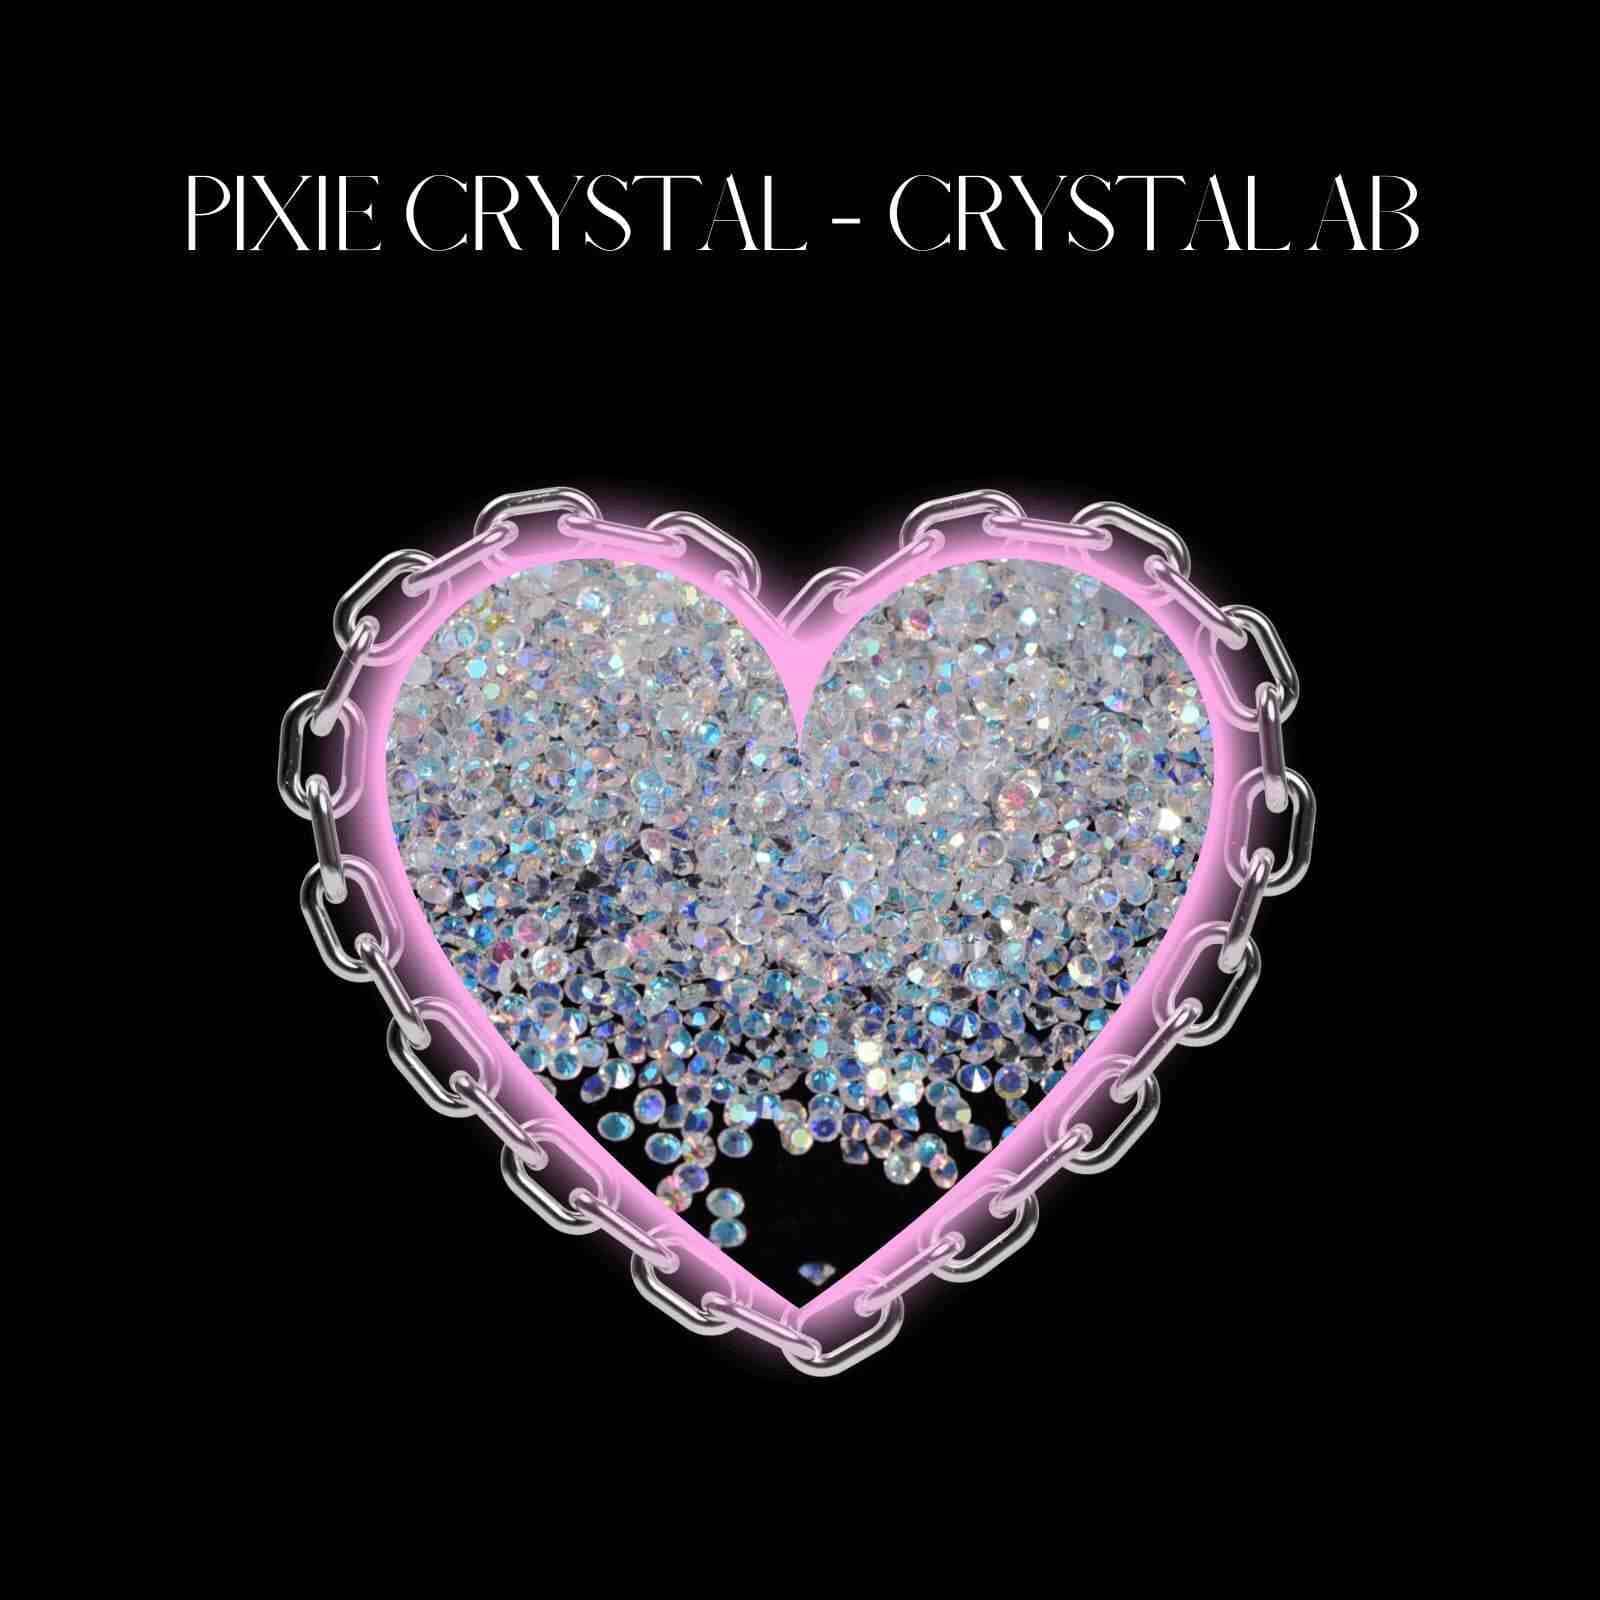 Fairy Dust - Pixie Crystals STRASS DENTAIRES Tooth Gems World CRYSTAL AB 